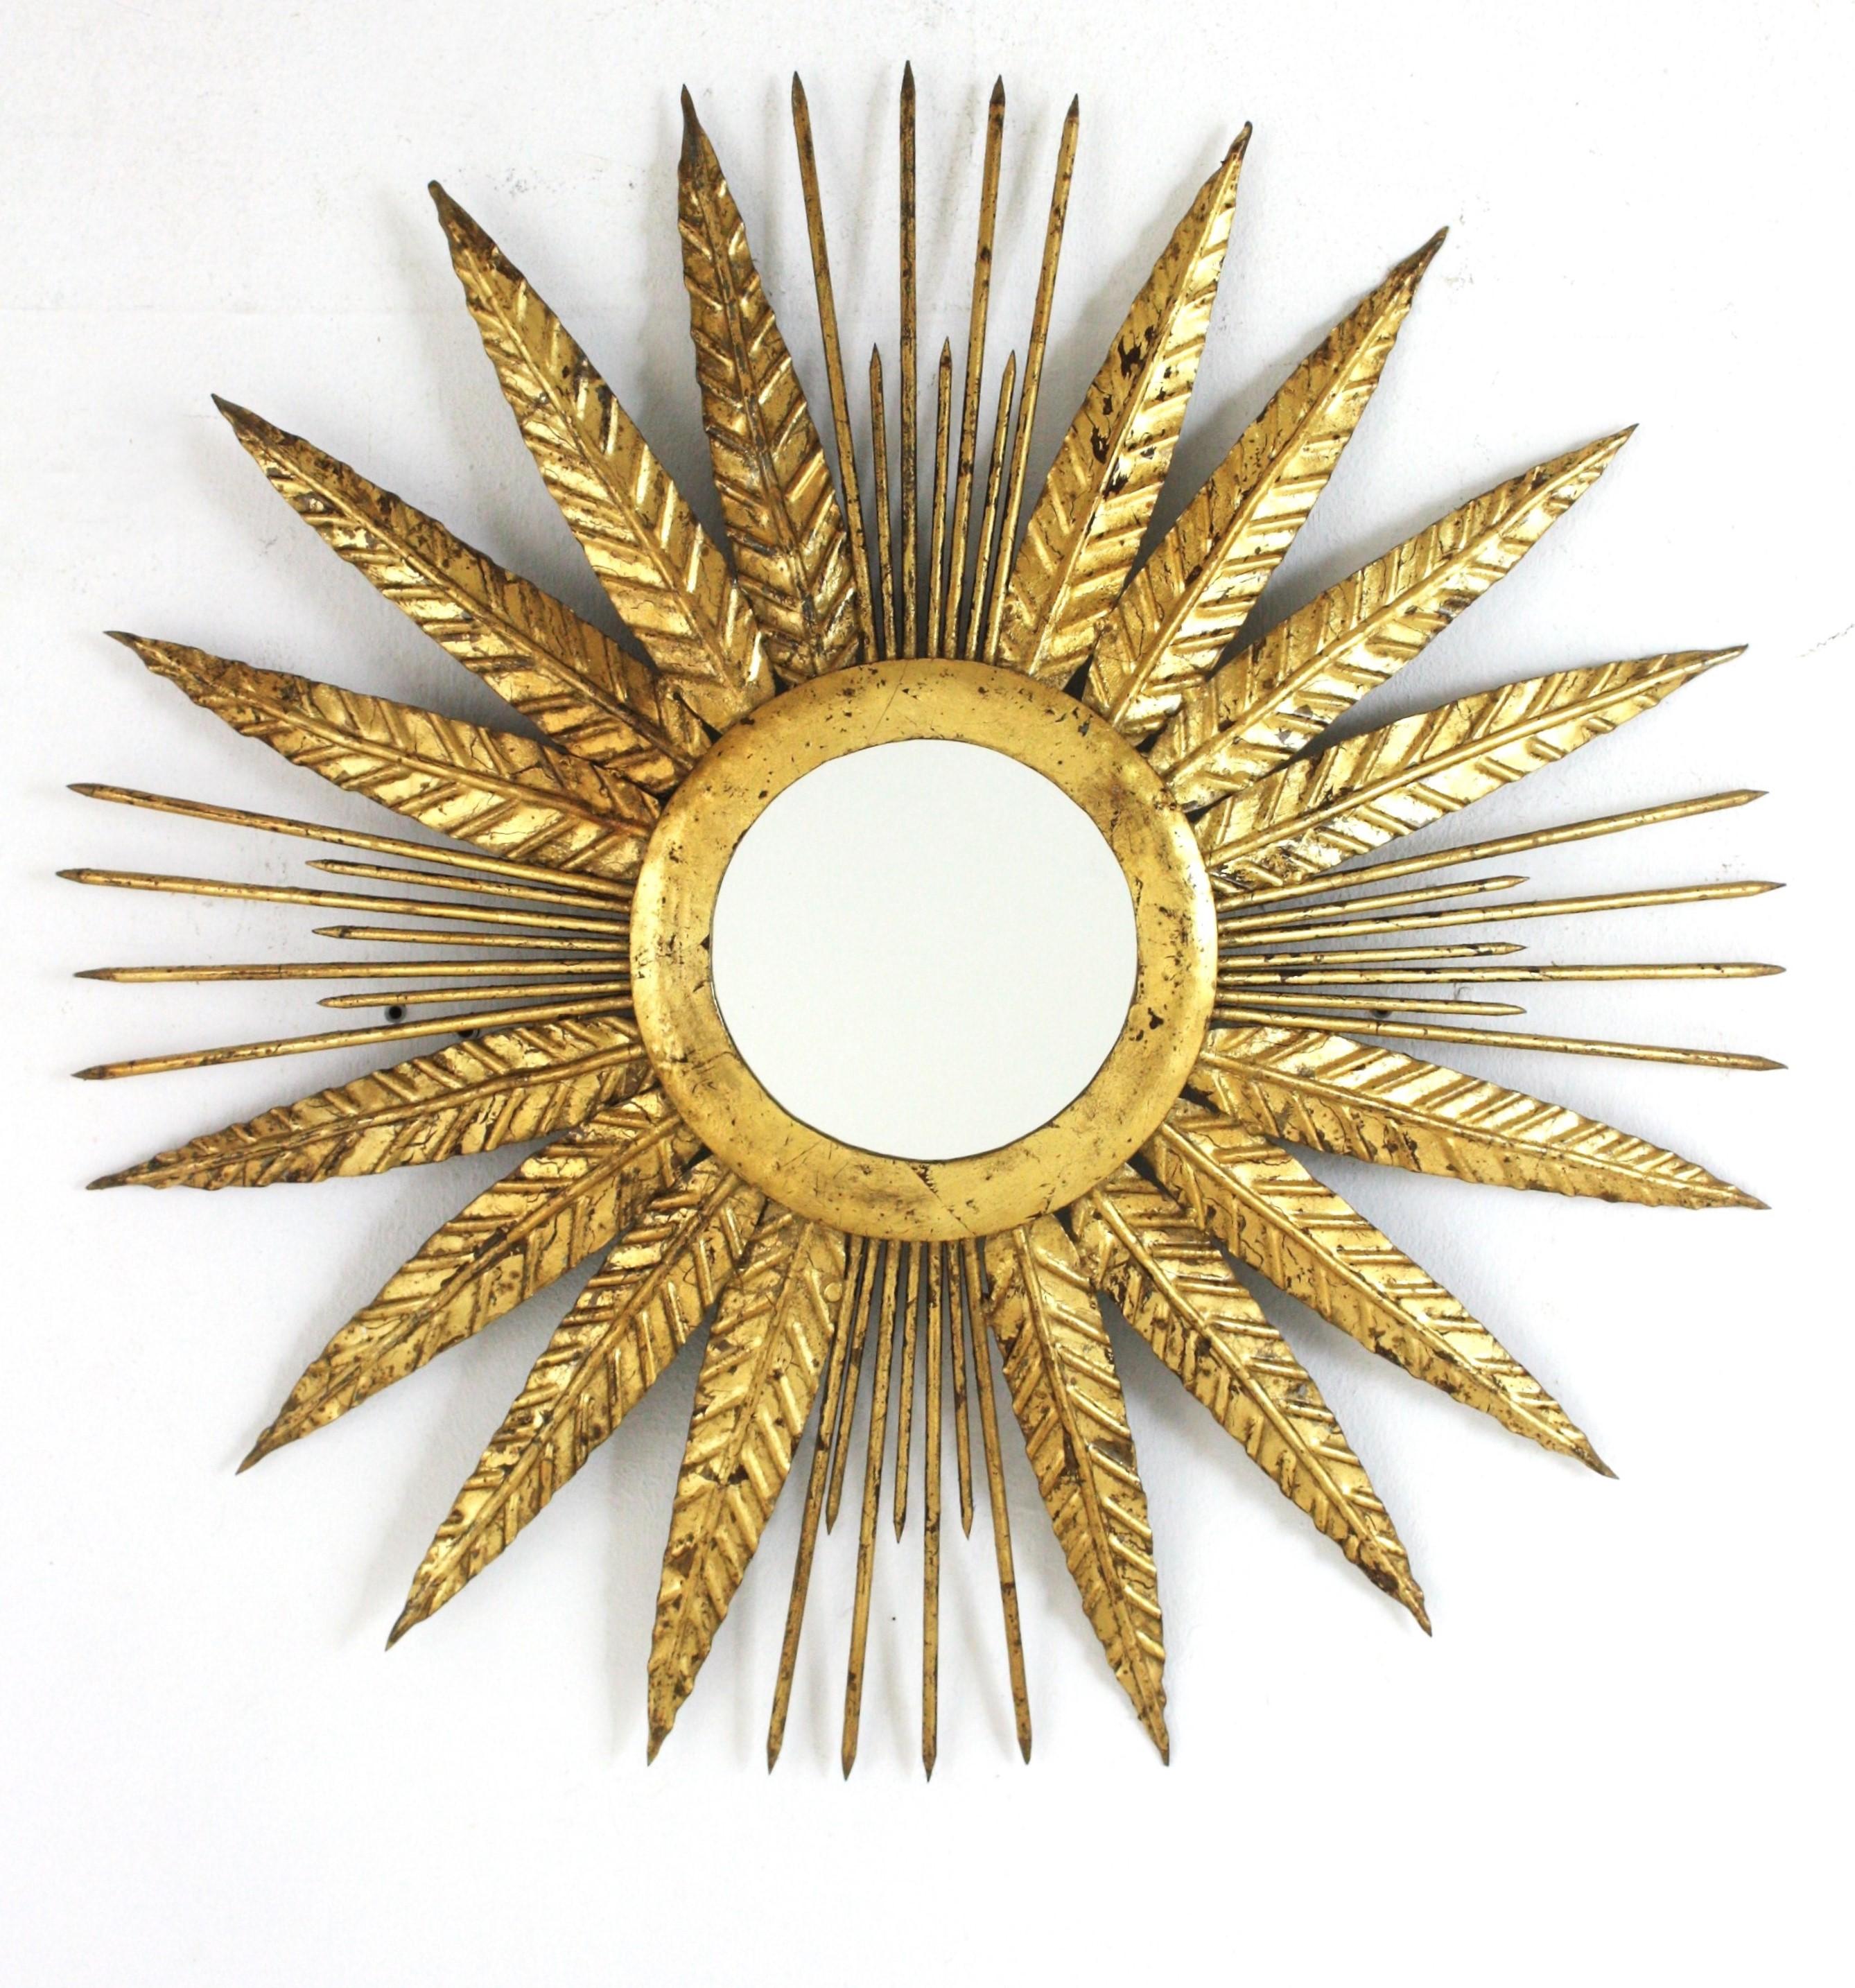 French sunburst mirror in gilt iron with leaves and  spikey gilt nail rays. France, 1940s.
Eye-catching hand-hammered gold leaf gilt iron leafed sunburst mirror from the late Art Deco period.
Highly decorative design alternating four iron leaves